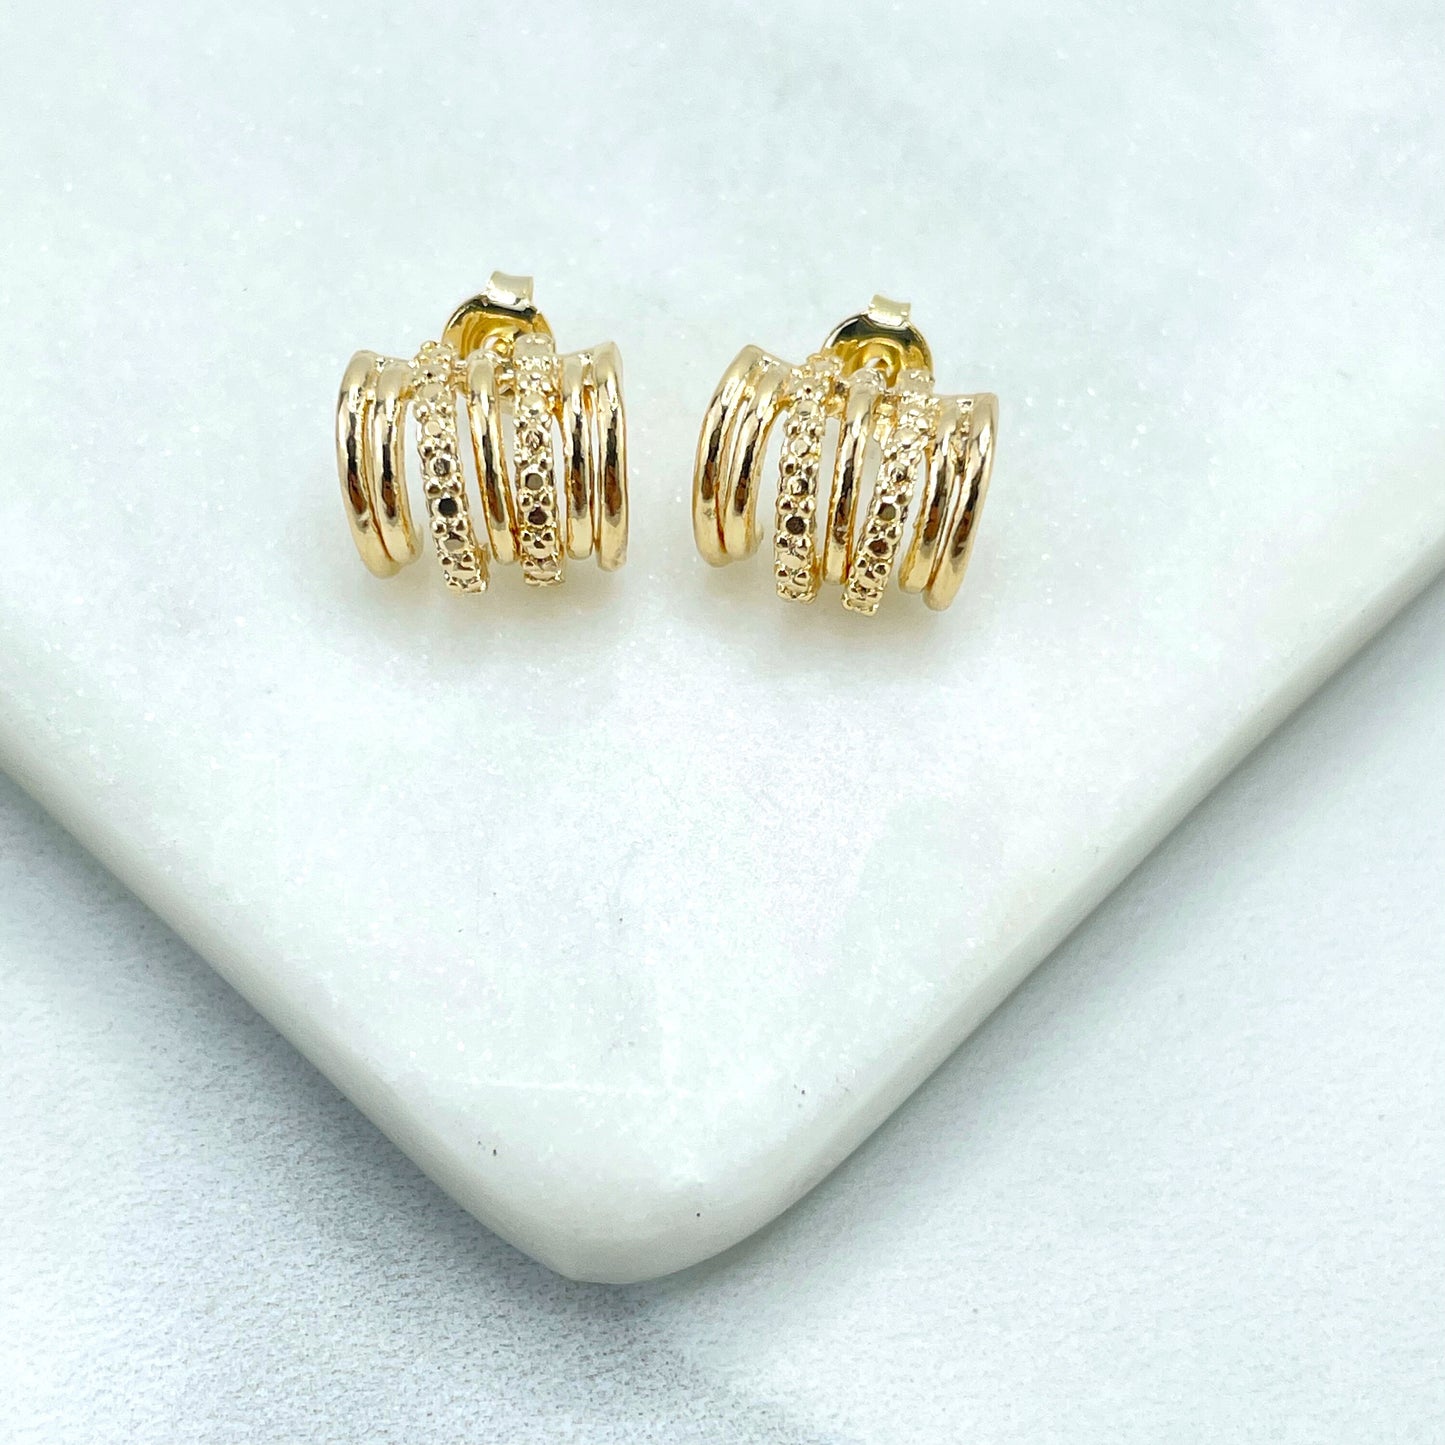 18k Gold Filled Plain and Texturized Multi Huggie Earrings, Fashion Design, Wholesale Jewelry Making Supplies